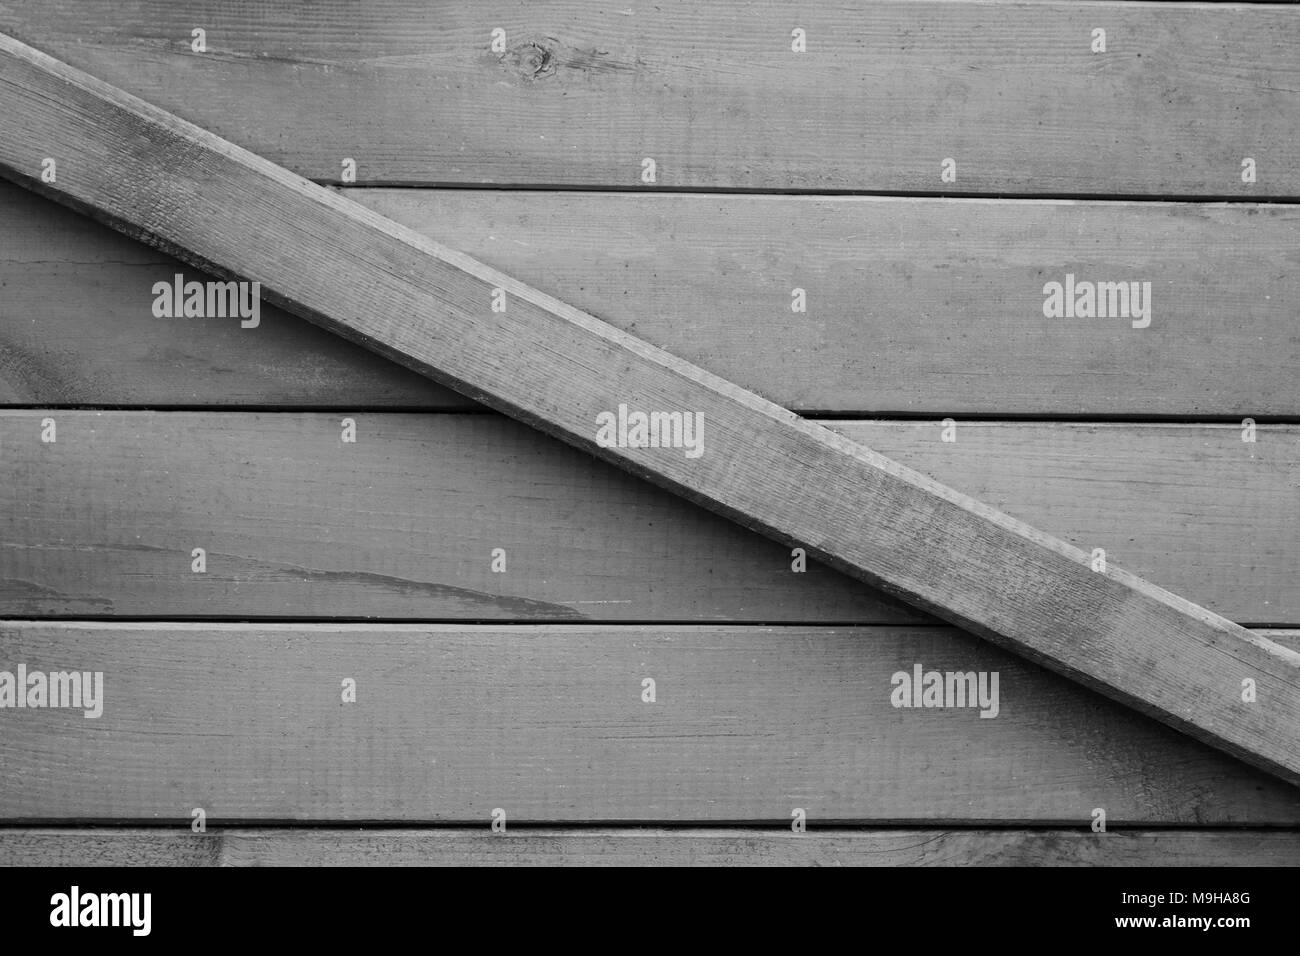 Old vintage black and white wooden texture background Stock Photo